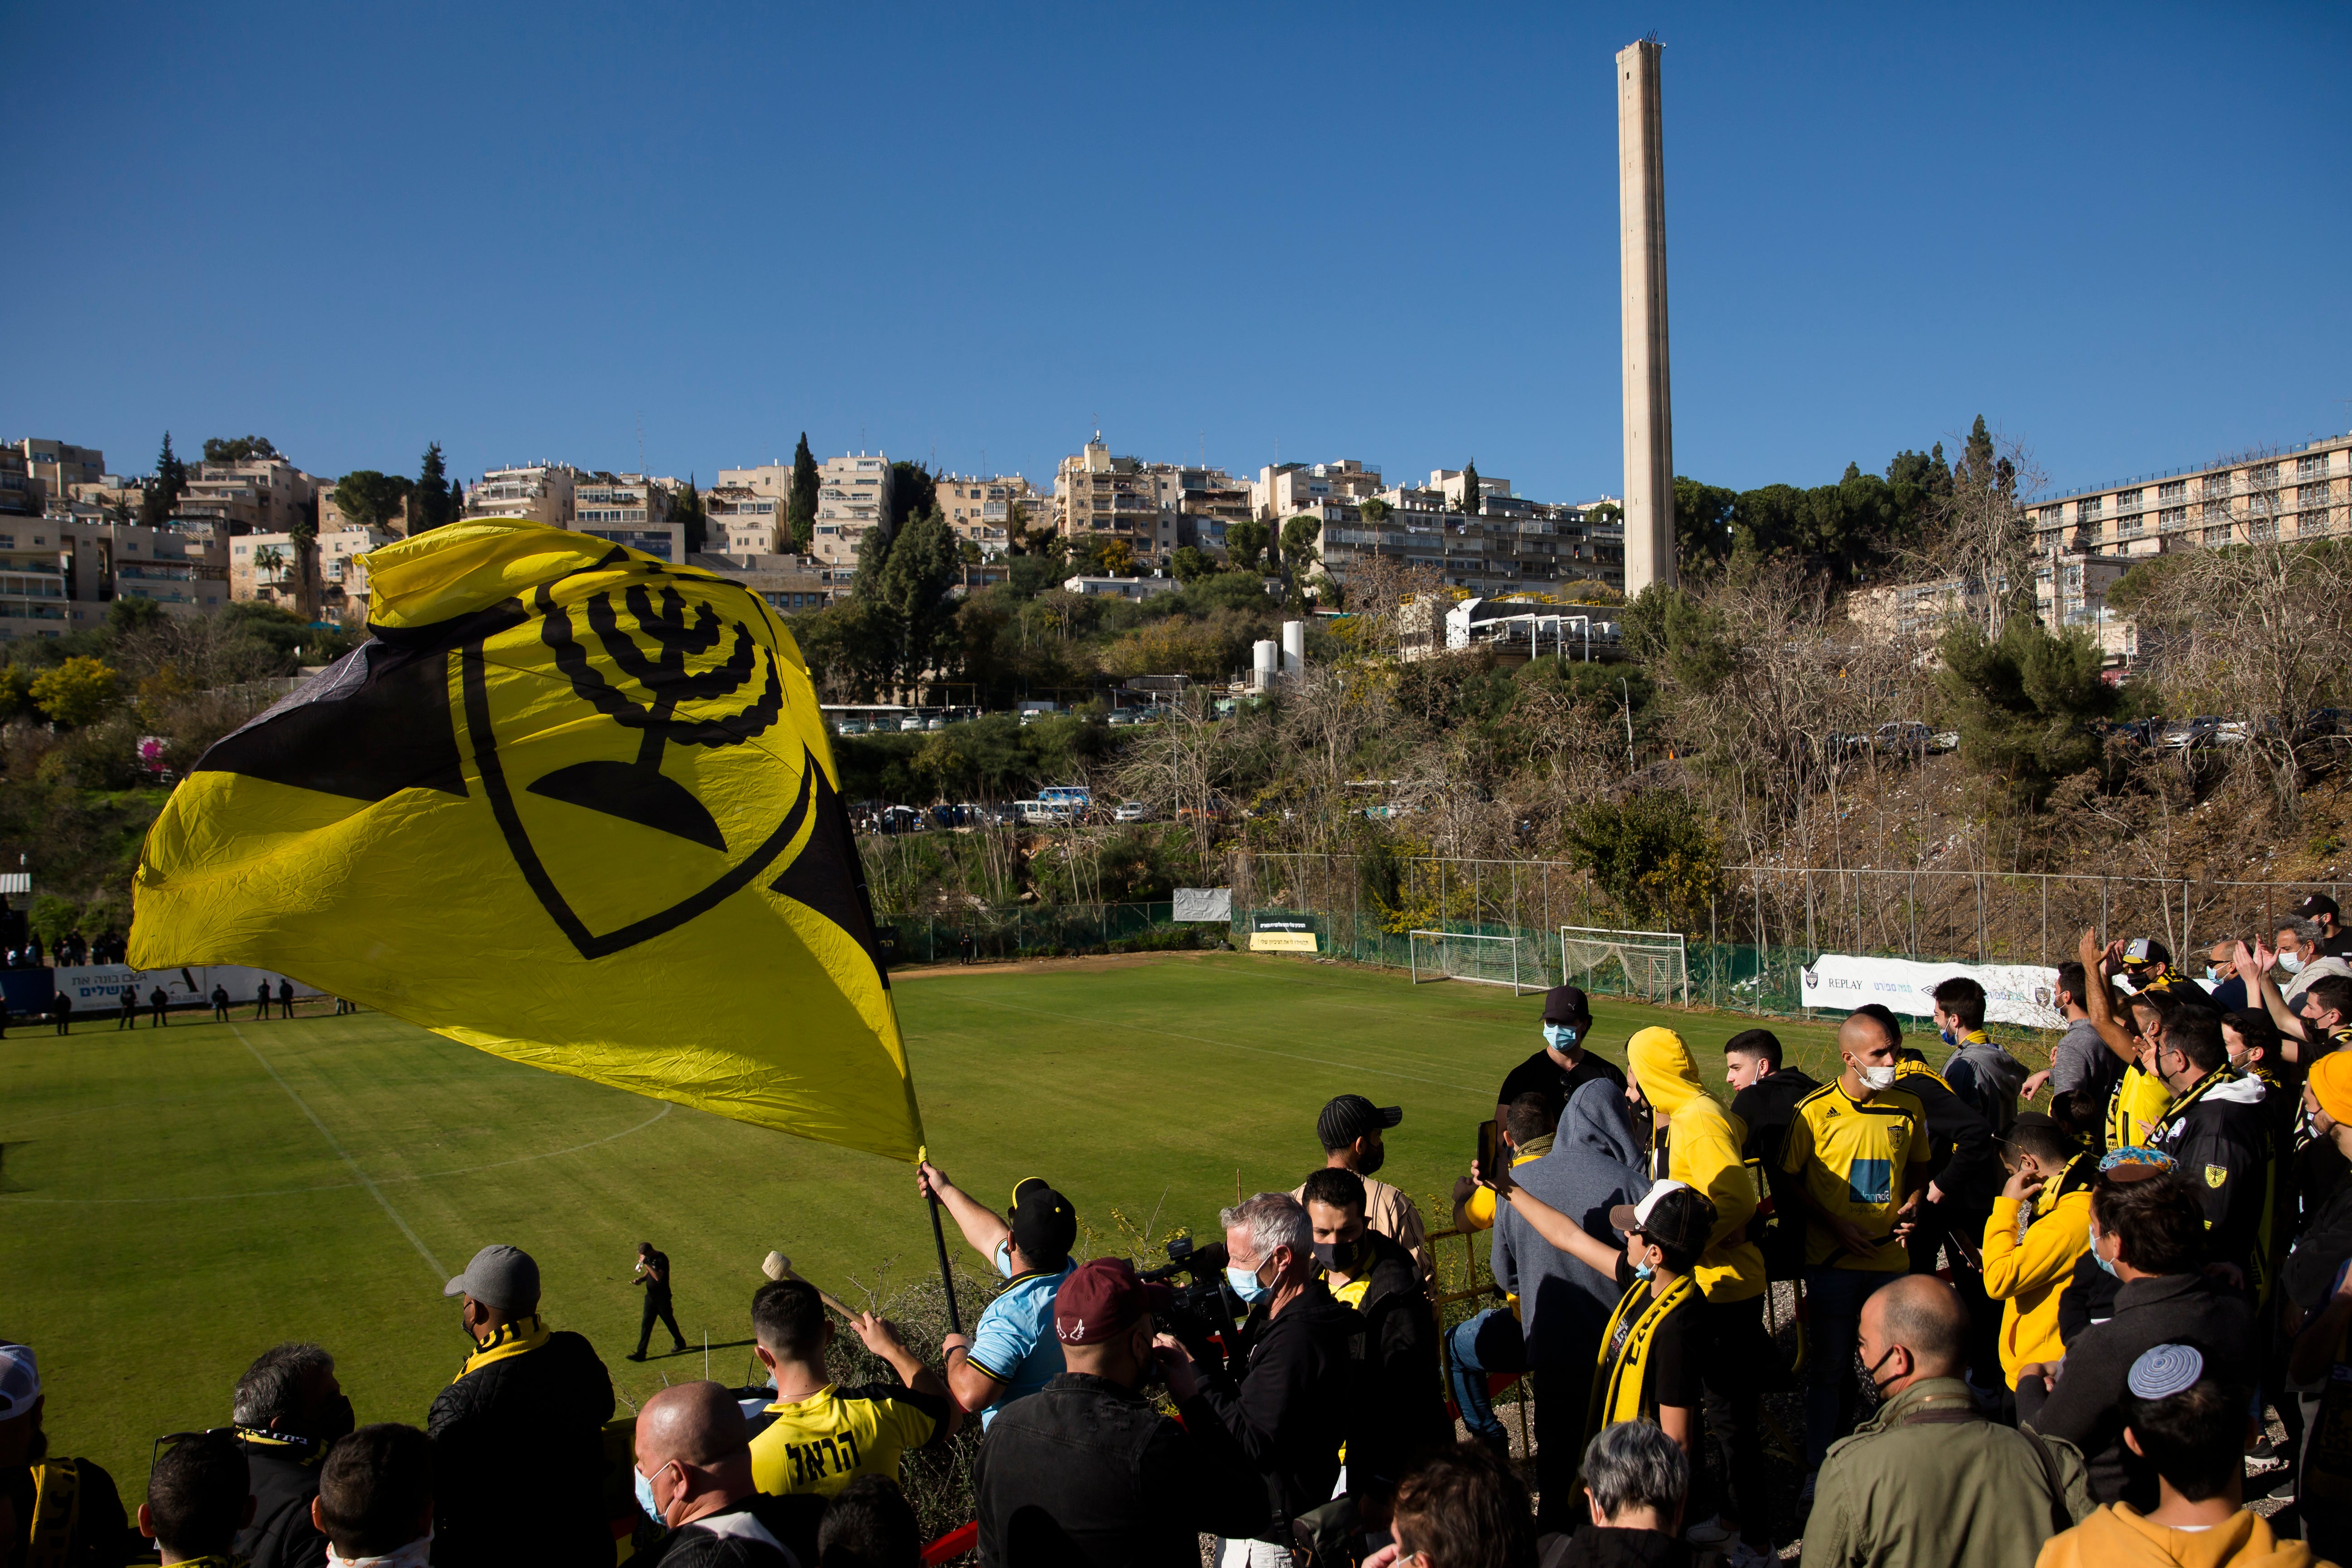 The Palestine FA claim that Beitar Jerusalem fans proudly sing that they’re ‘the most racist team’ in Israel